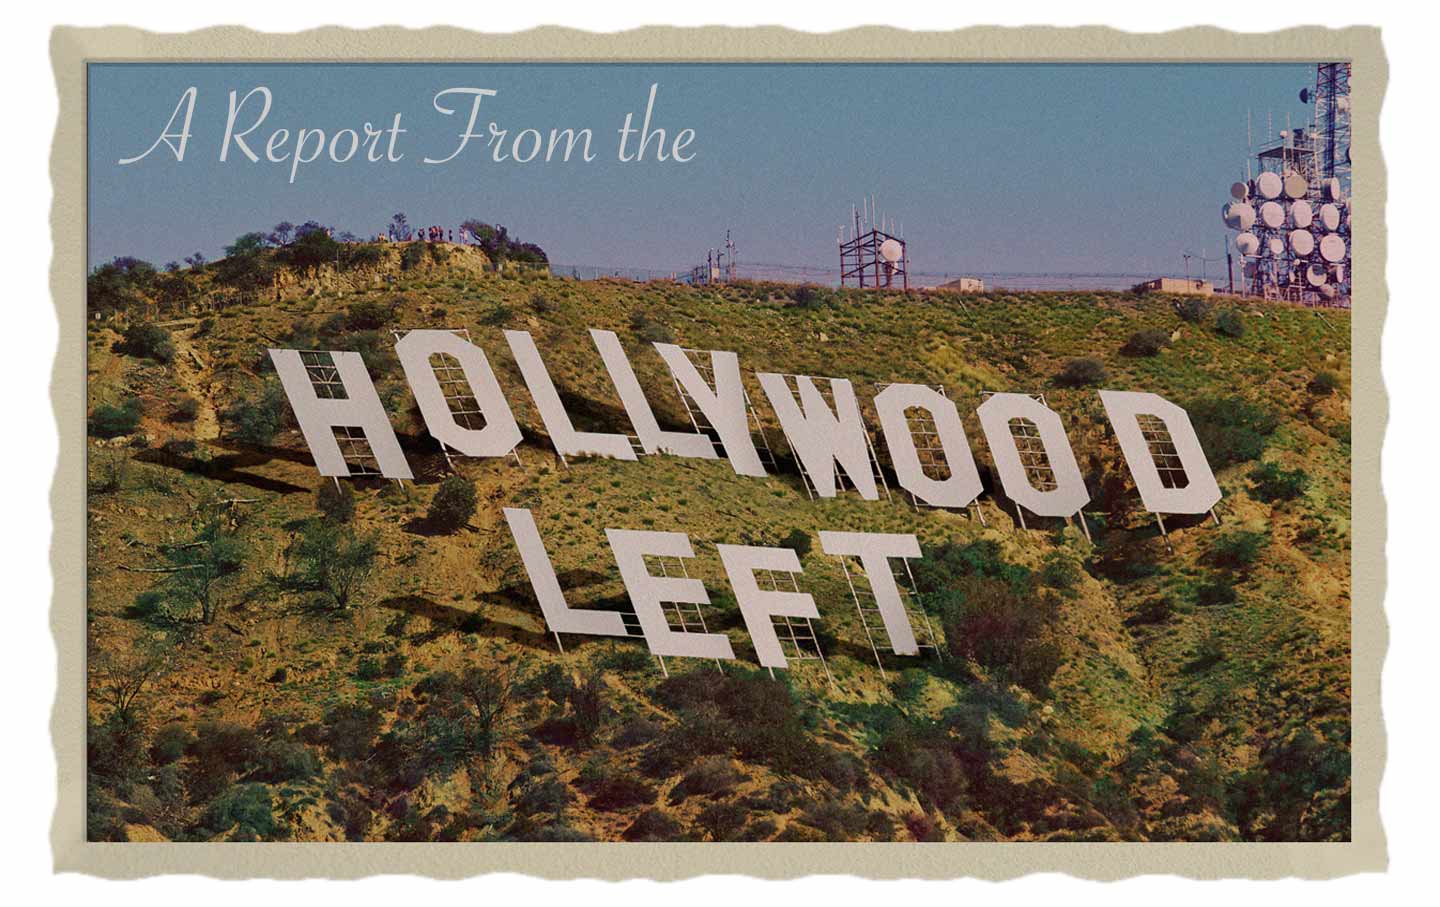 The Hollywood sign now reads 